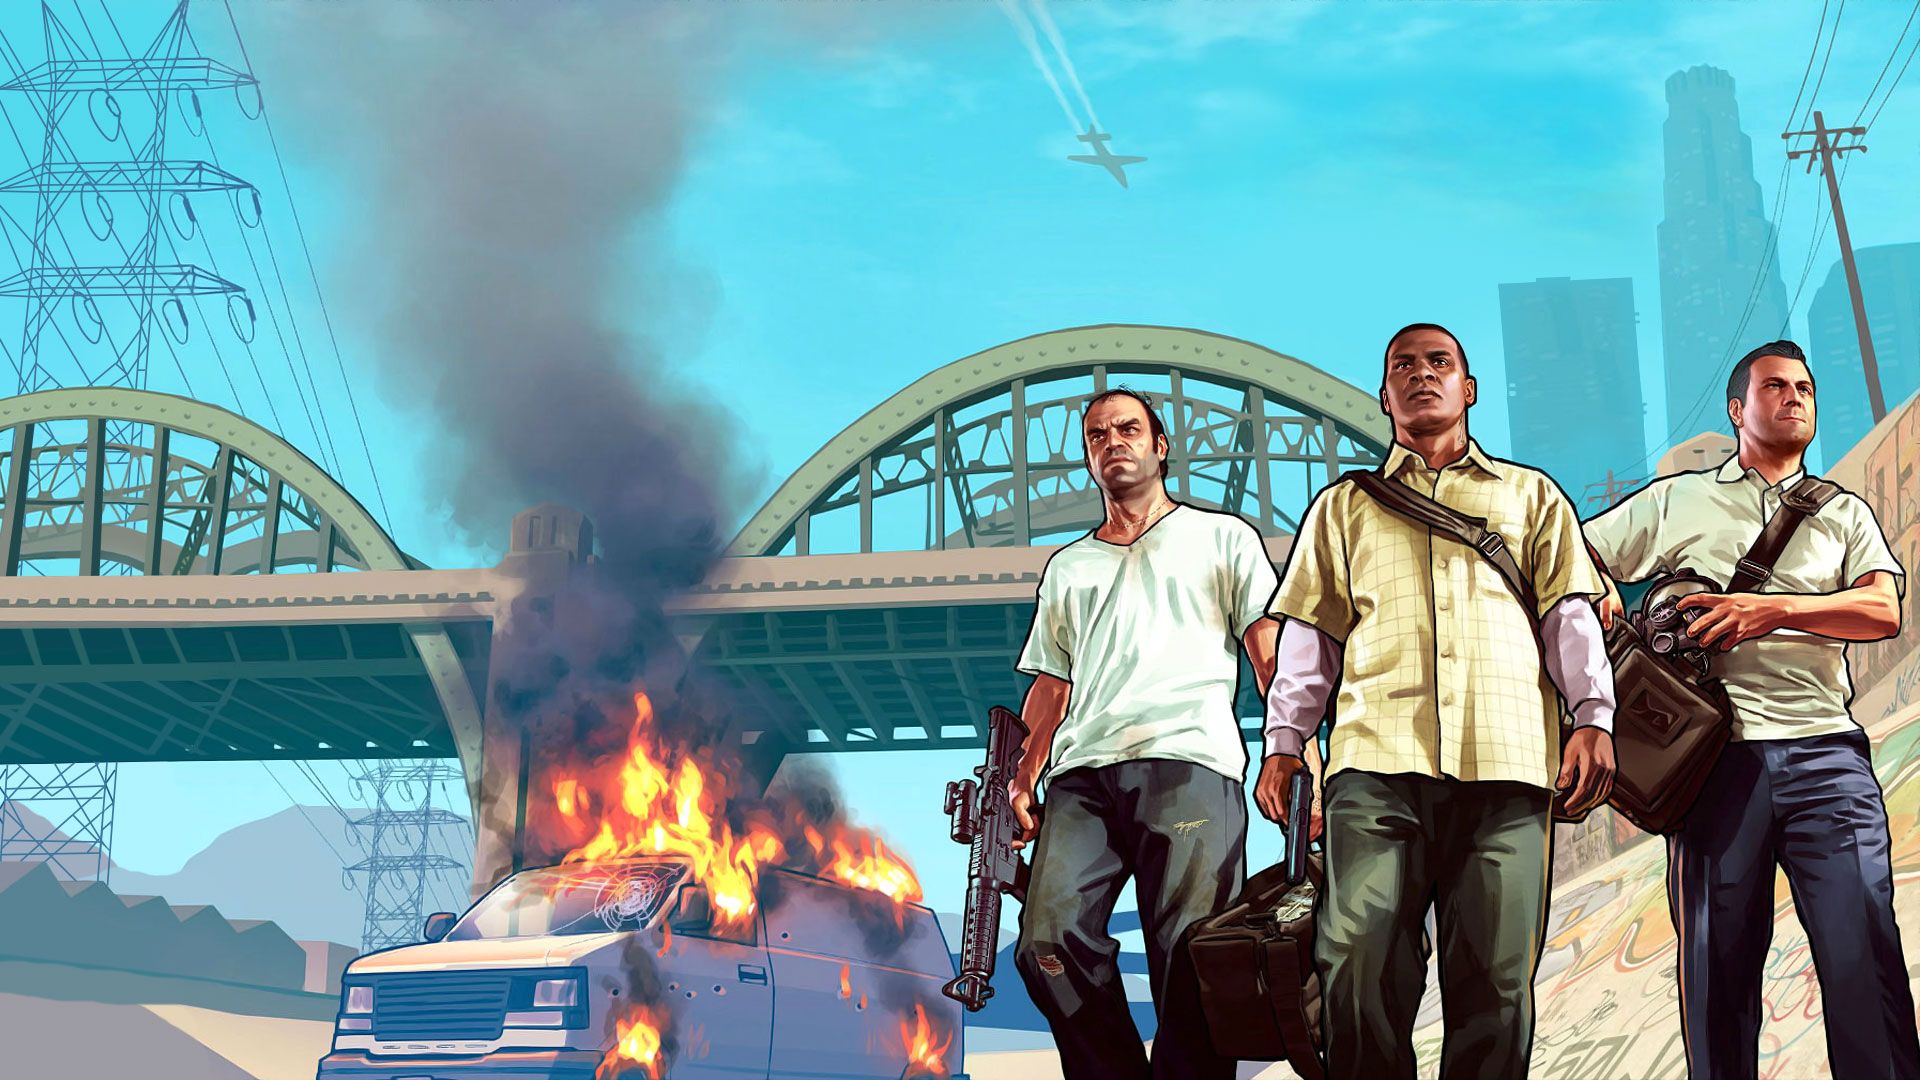 Grand Theft Auto 5 Wallpapers High Quality | Download Free